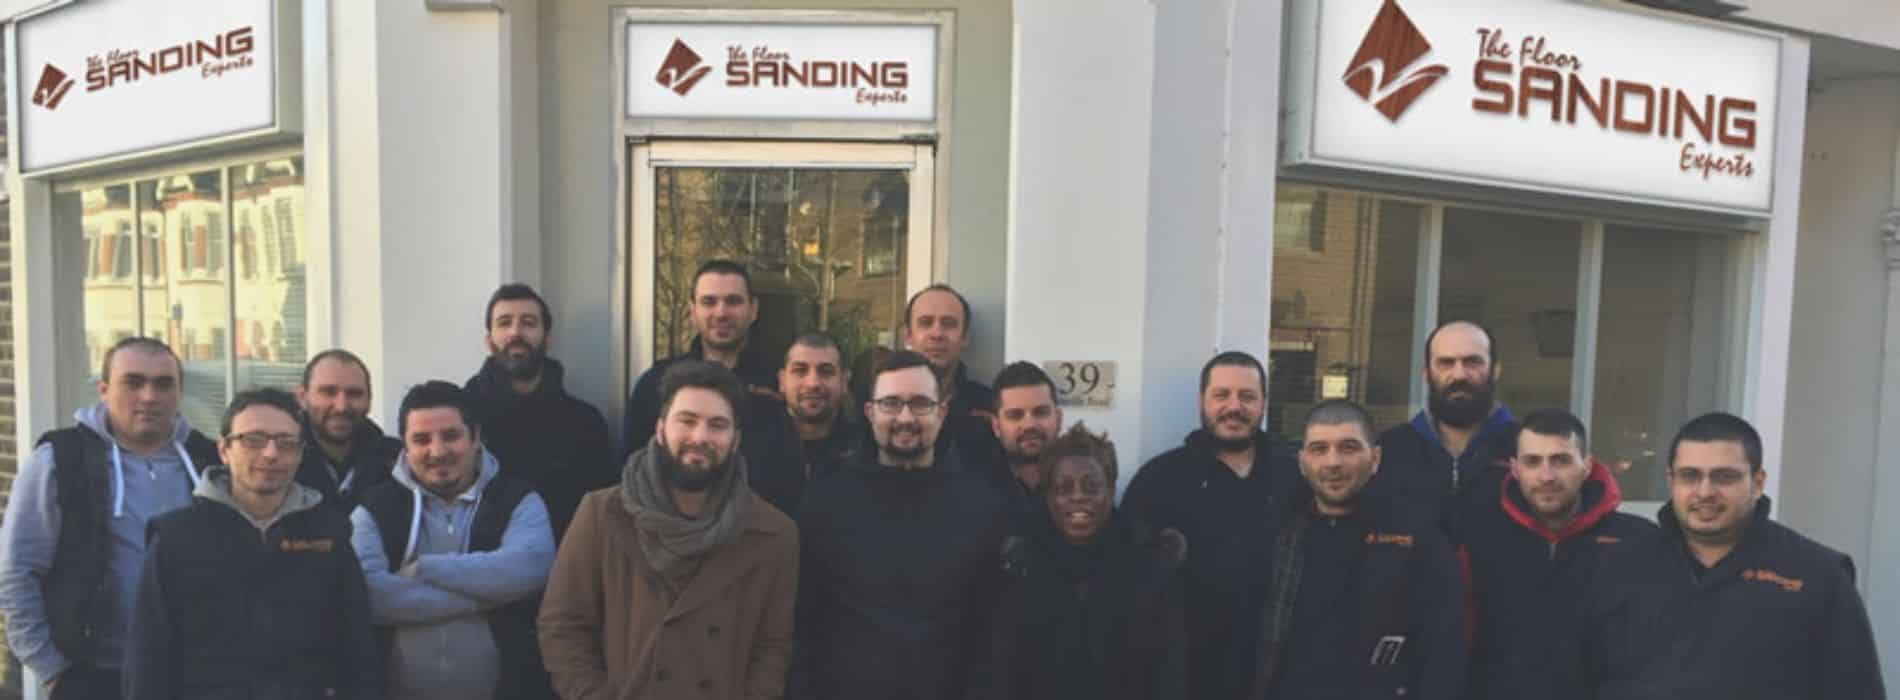 Mr Sander® team in Kennington, SE11: Transform your floors with our skilled professionals. Years of experience and dedication ensure top-quality services. Experience excellence at our office today.